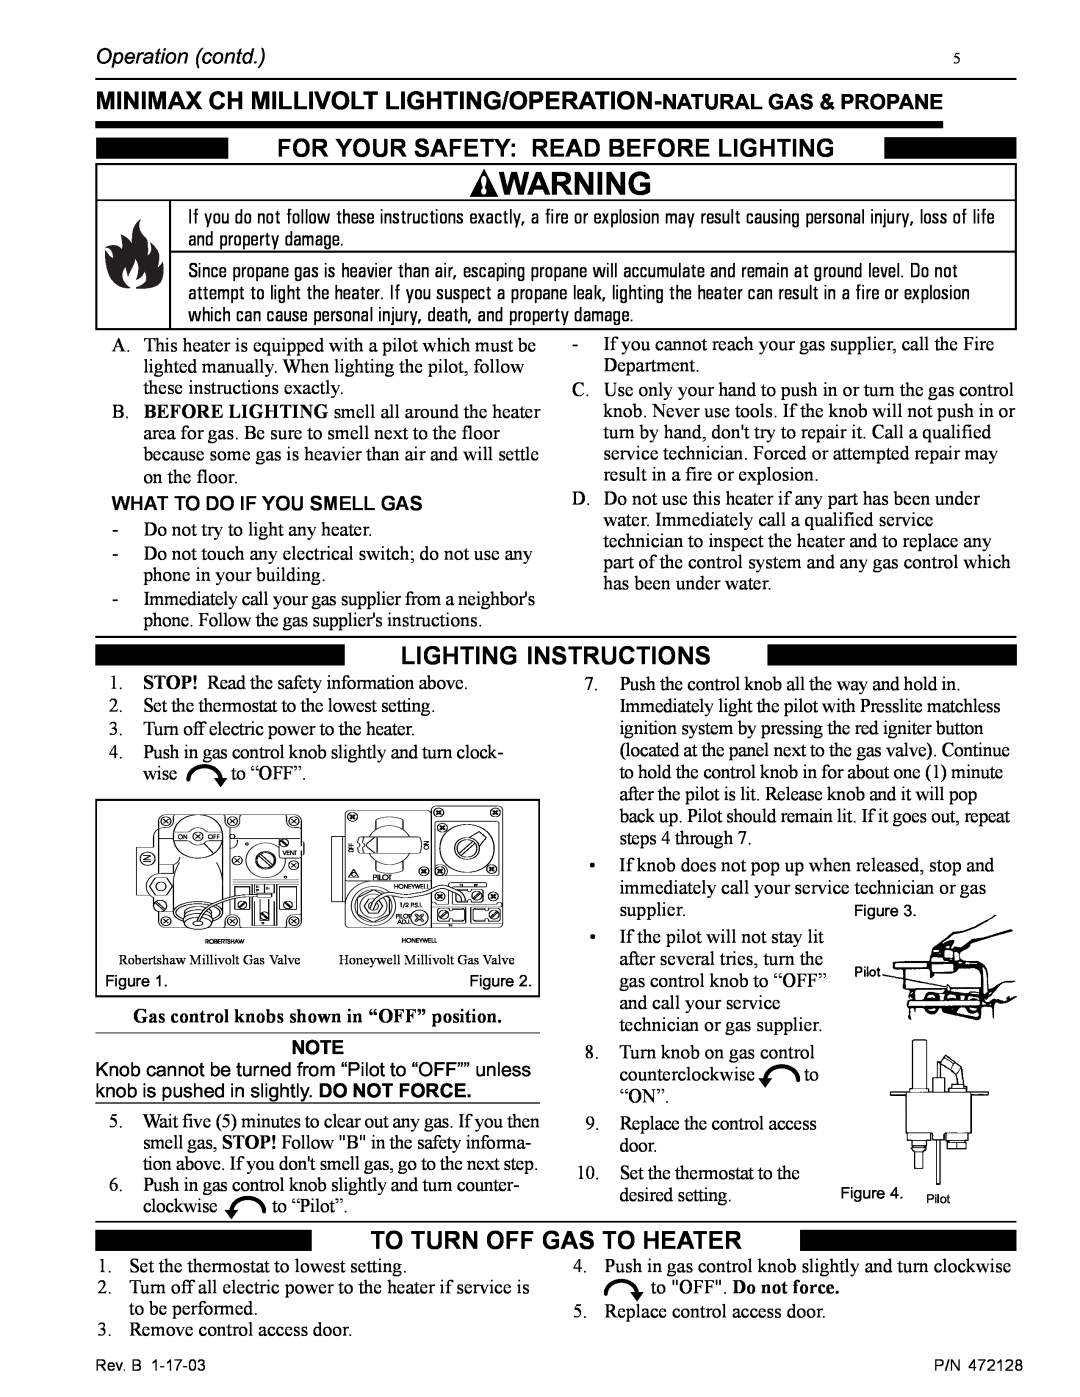 Pentair CH For Your Safety Read Before Lighting, Lighting Instructions, To Turn Off Gas To Heater, Operation contd 